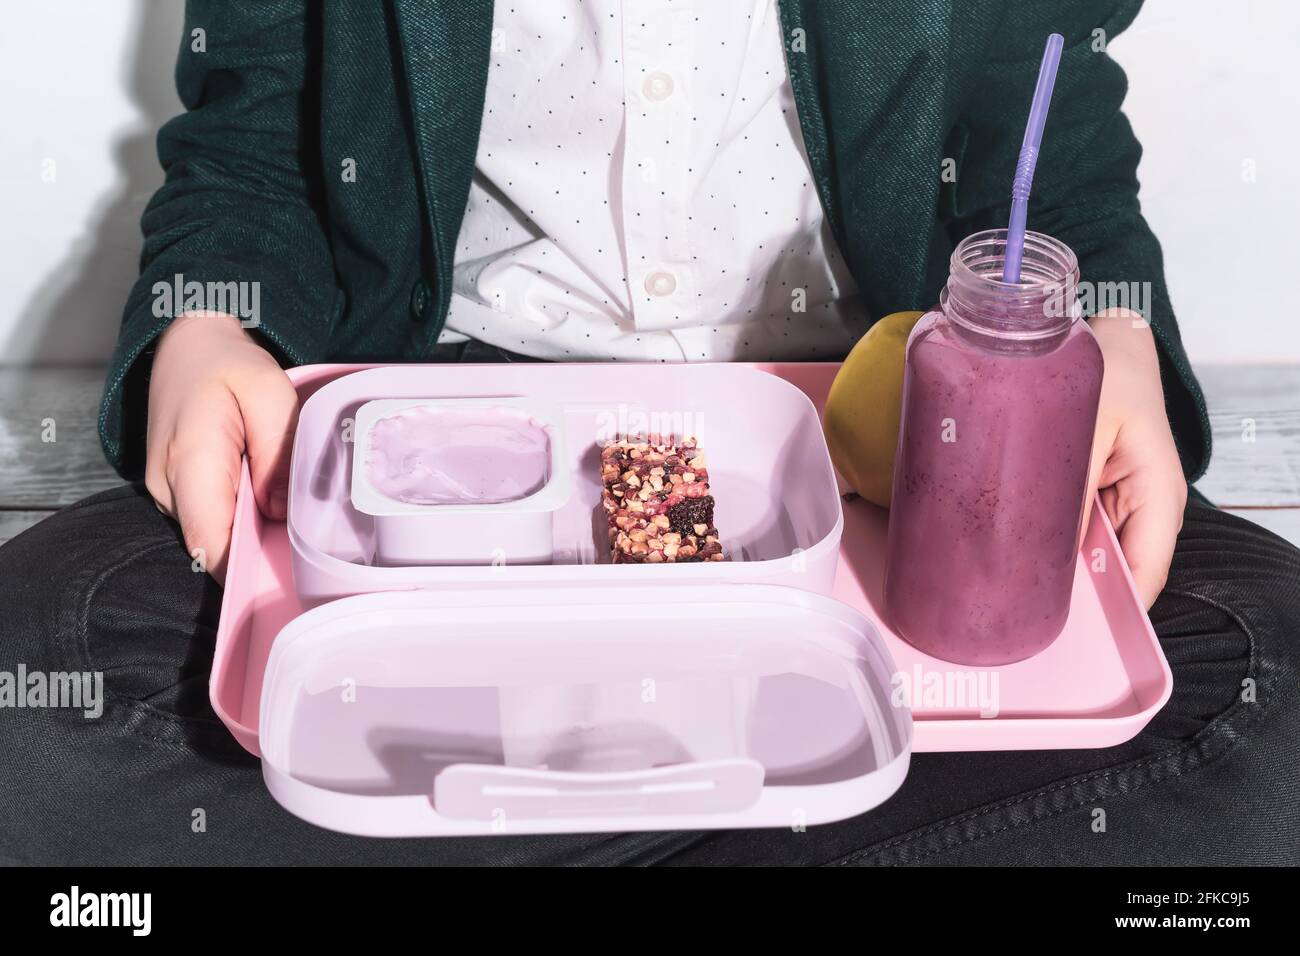 A schoolboy sits on the floor in a lotus position with a tray in his hands with a healthy snack, yogurt, a cereal bar, an apple and an oatmeal cocktai Stock Photo